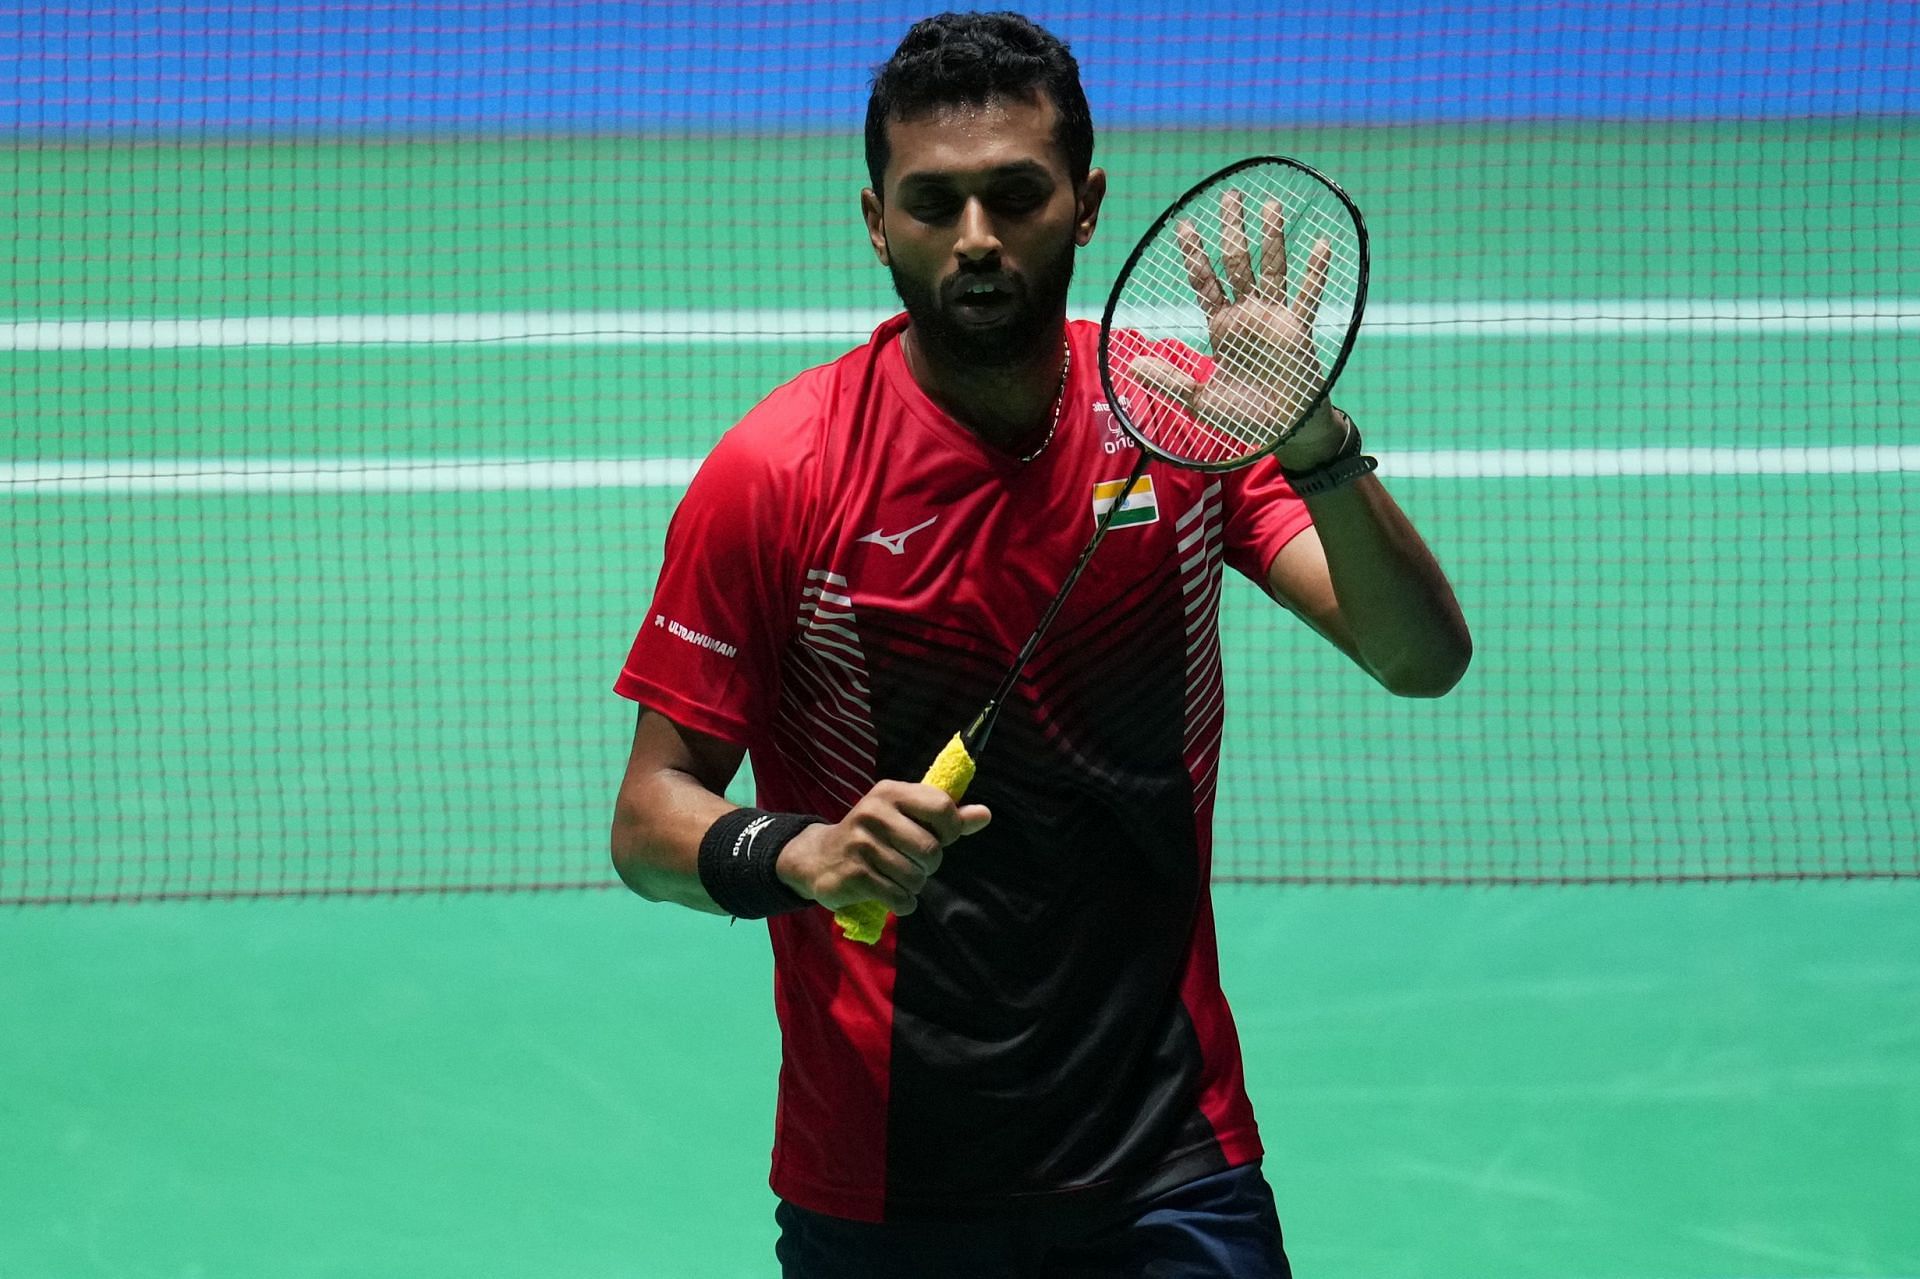 Taipei Open 2023 HS Prannoy vs Tommy Sugiarto, head-to-head, prediction, where to watch and live streaming details